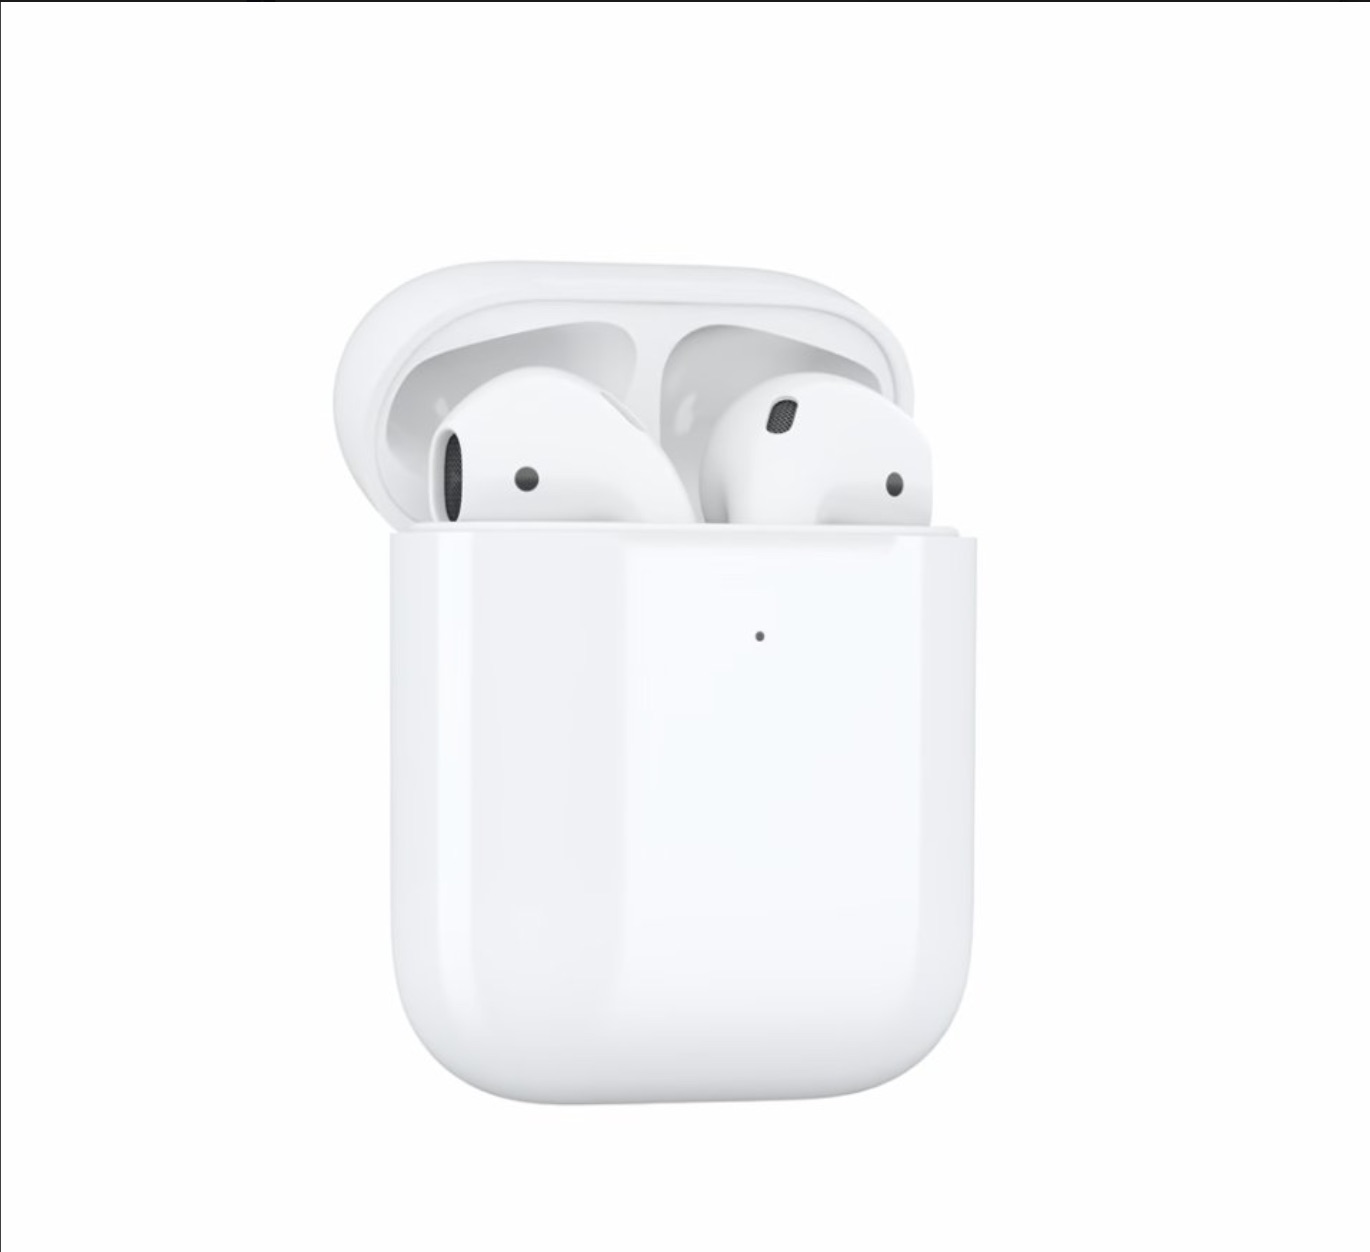 AirPods rumor roundup: Everything you need to know | iMore